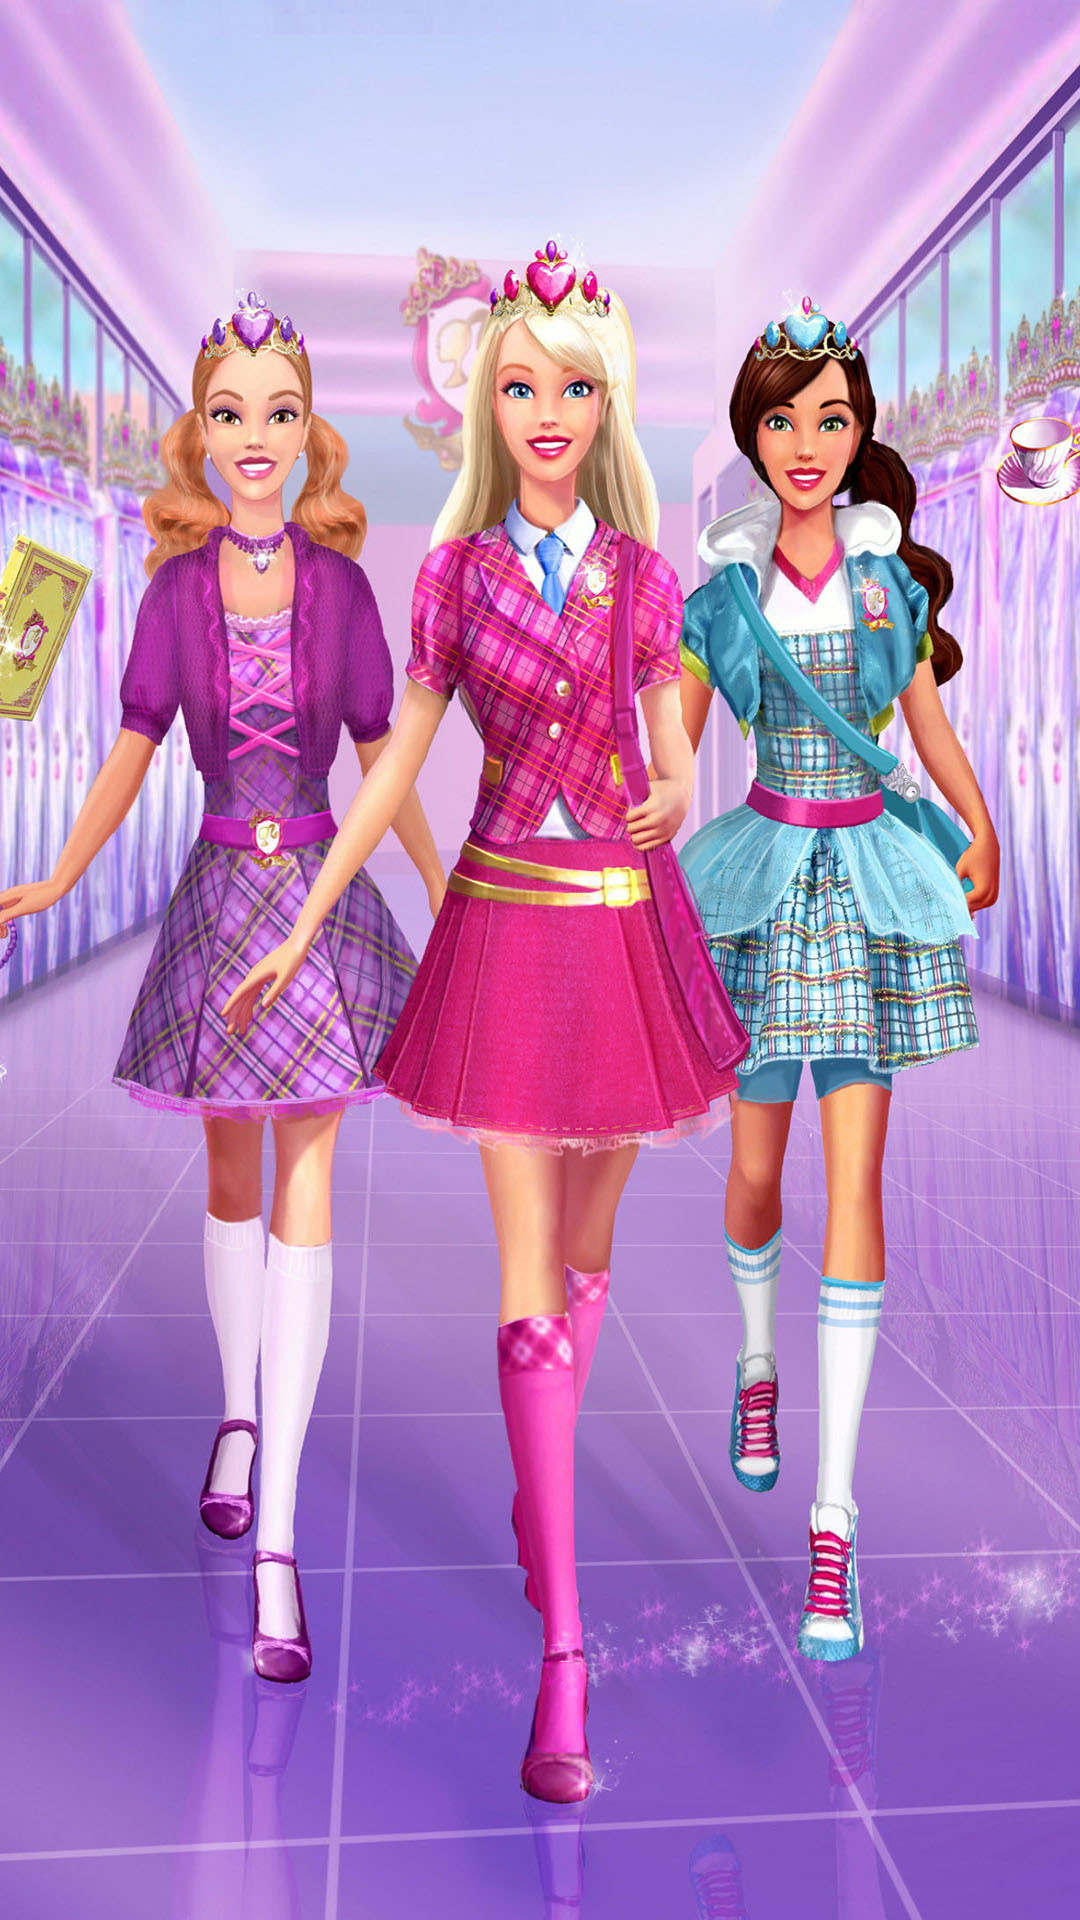 Barbie Princess High Quality Iphone Wallpapers Data-src - Barbie Princess  Charm School - 1080x1920 Wallpaper 